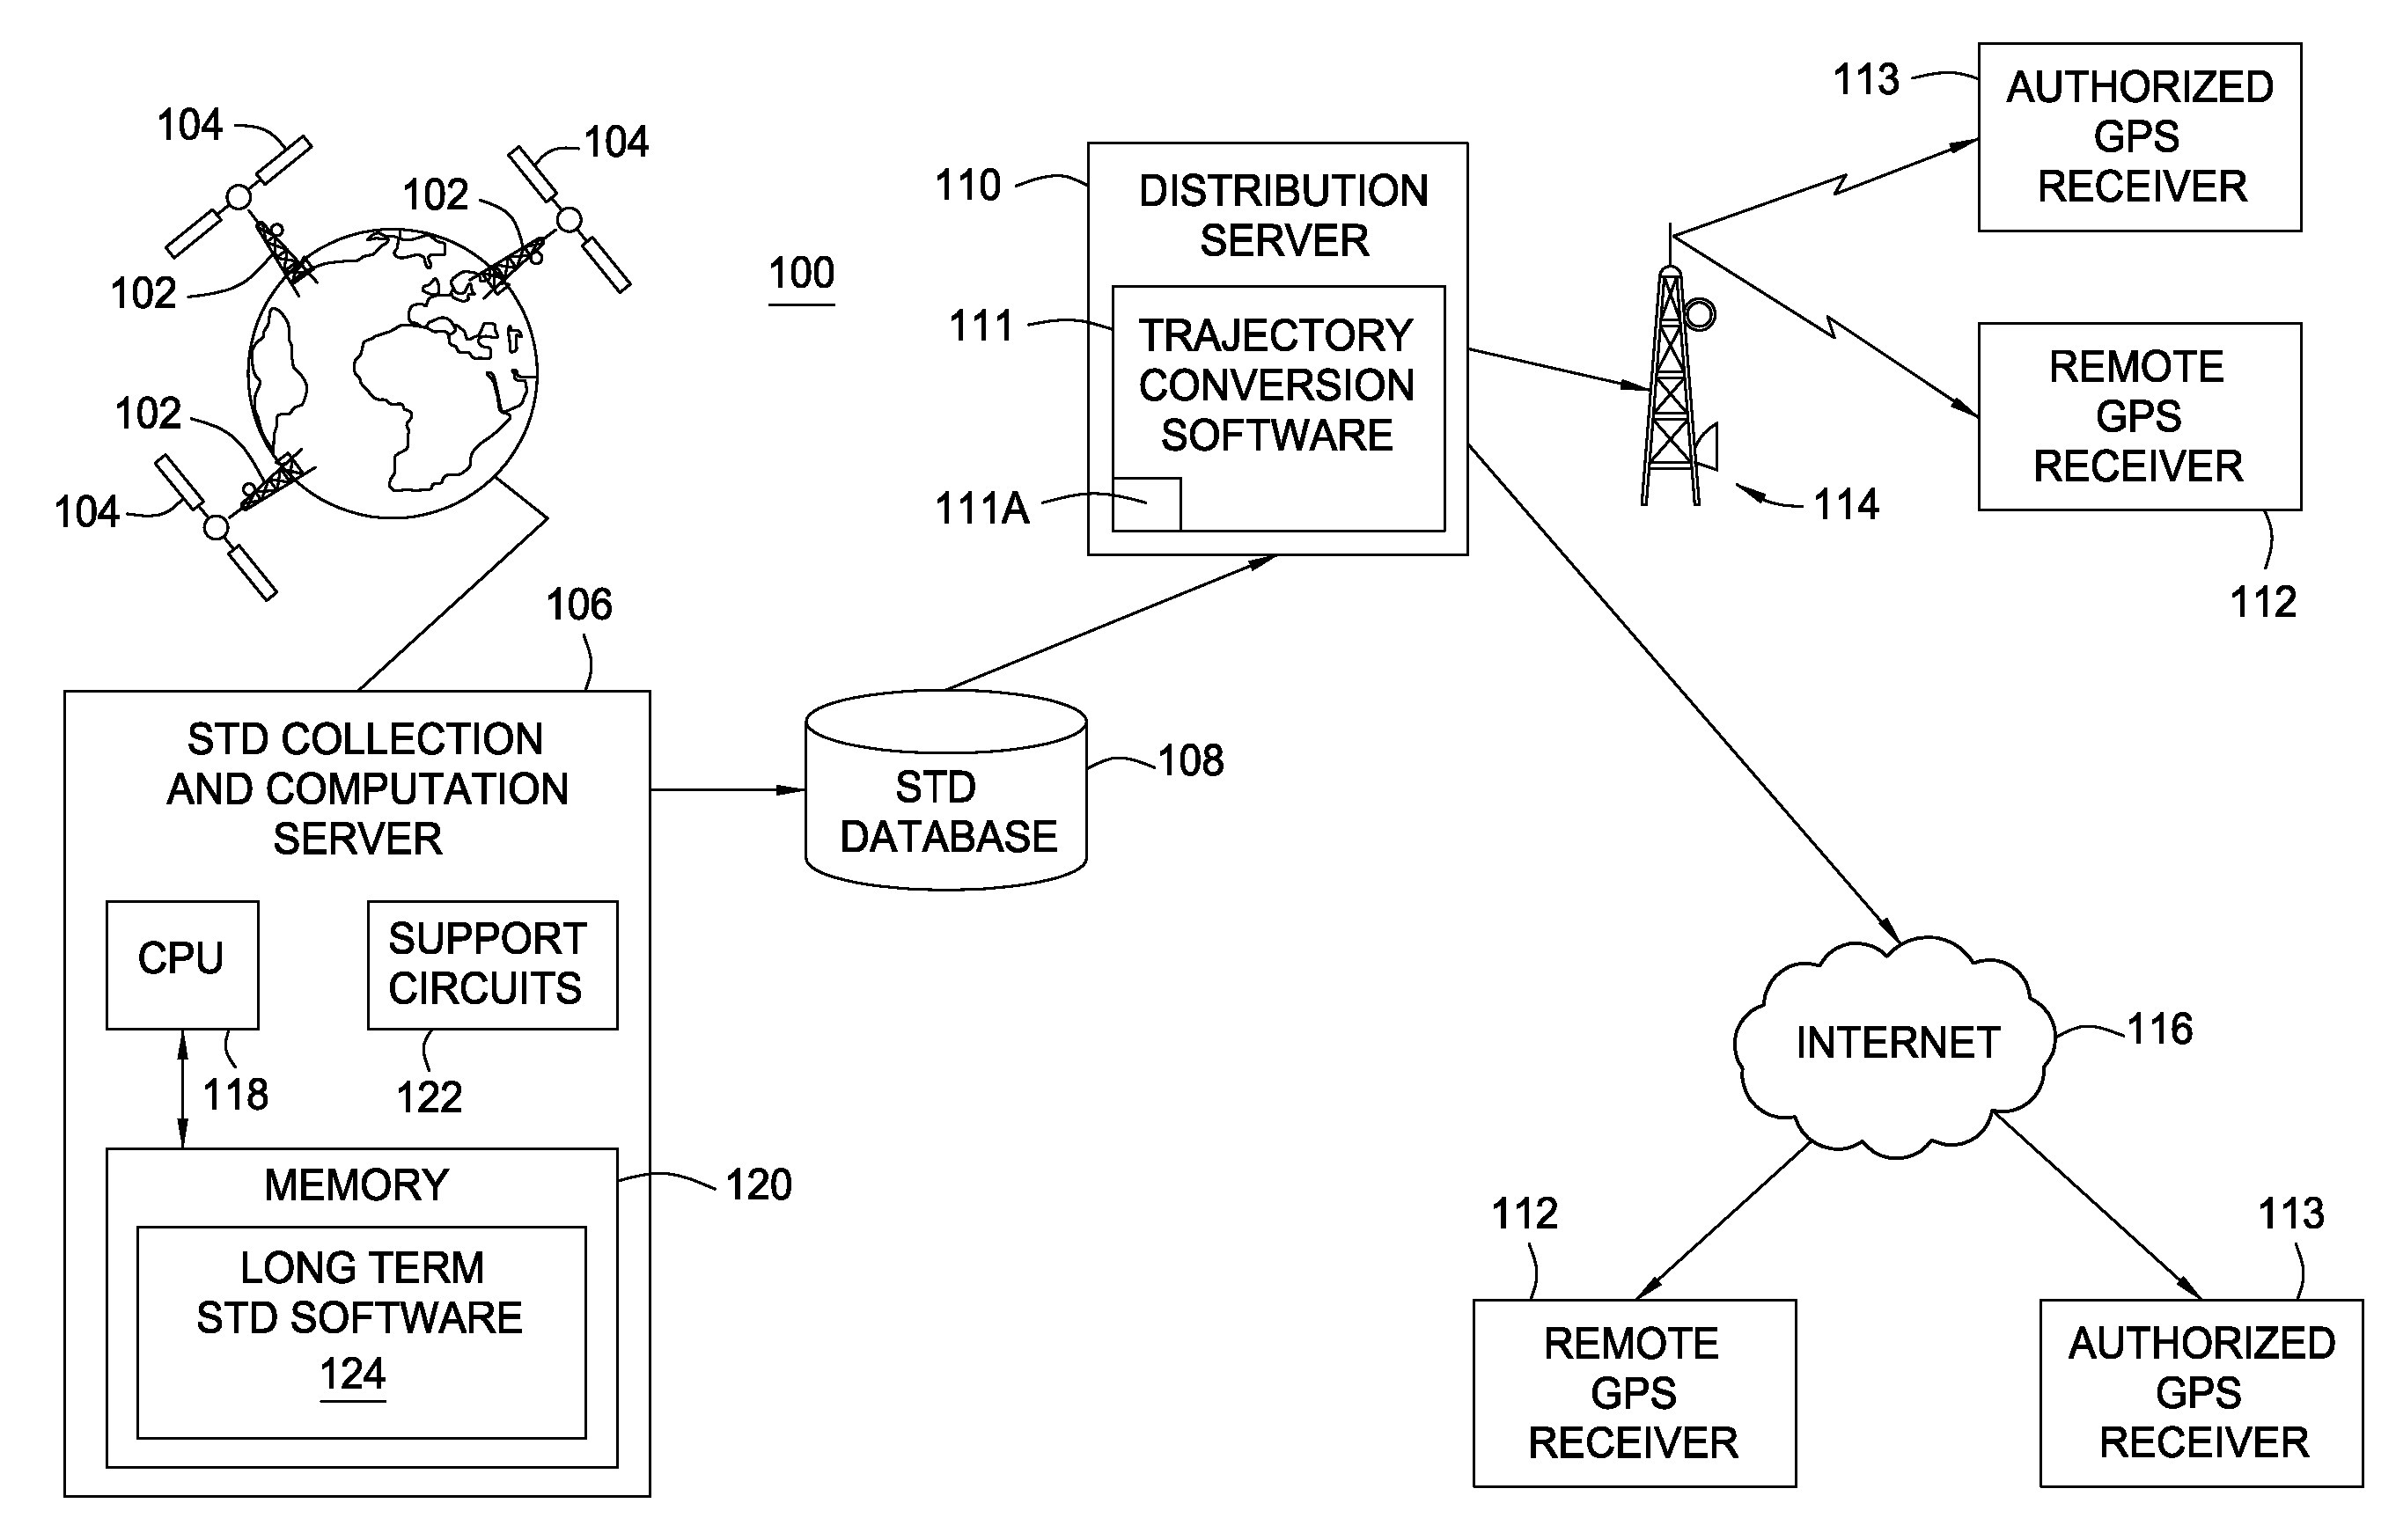 Method and Apparatus for Generating and Securely Distributing Long-Term Satellite Tracking Information